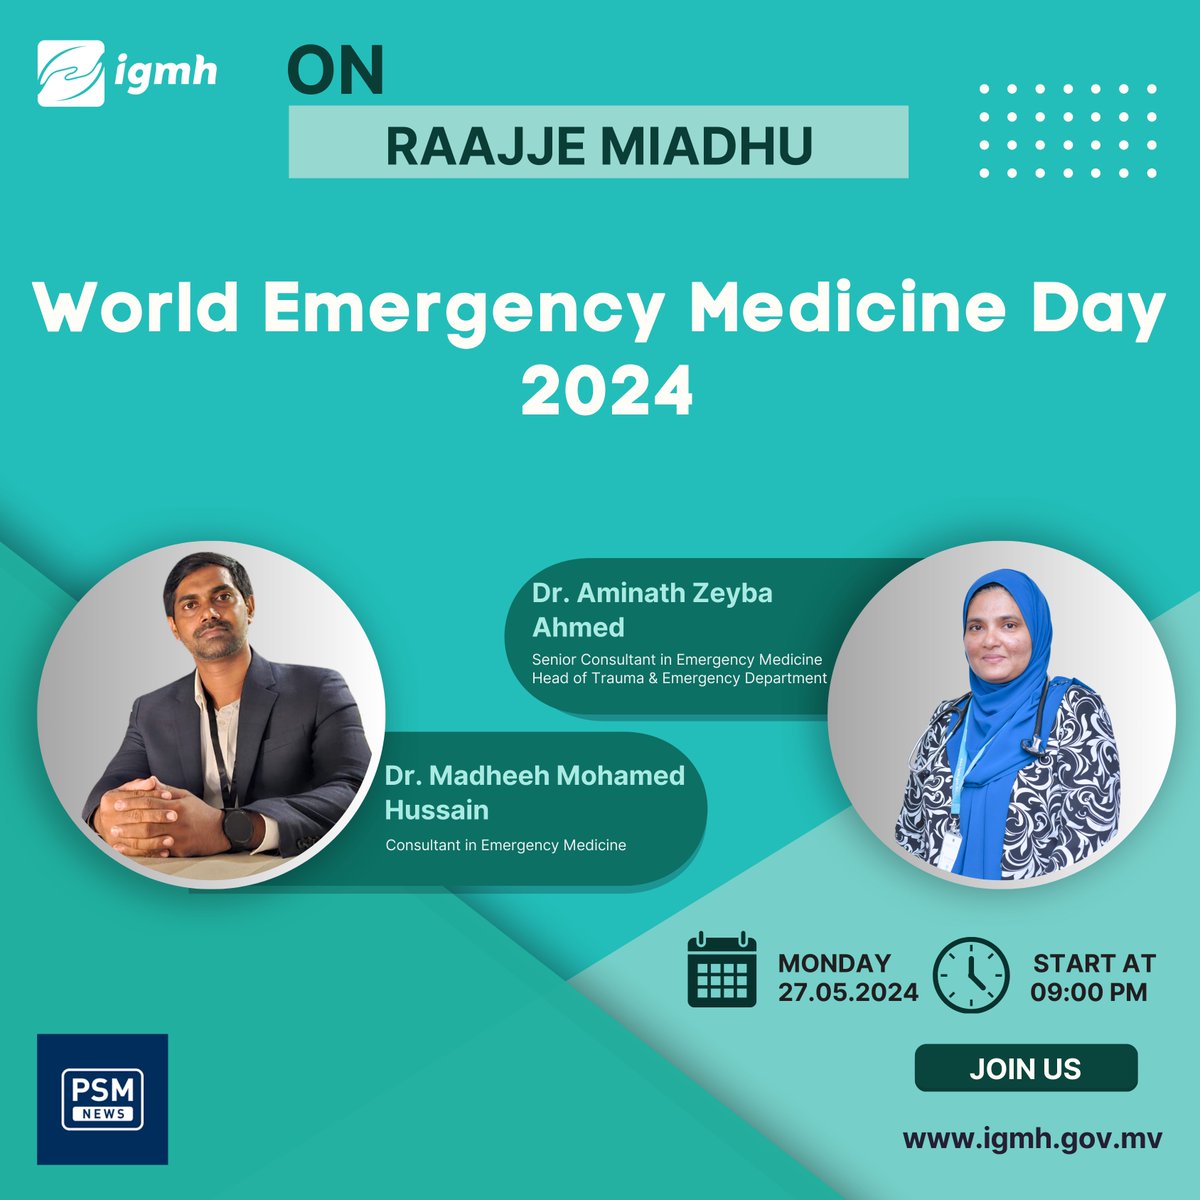 Dr. Aminath Zeyba Ahmed (Senior Consultant in Emergency Medicine | Head of Trauma & Emergency Department) and Dr. Madheeh Mohamed Hussain (Consultant in Emergency Medicine) will be live on #raajjemiadhu @psmnewsmv tonight (27.05.2024) on the occassion of World Emergency Medicine